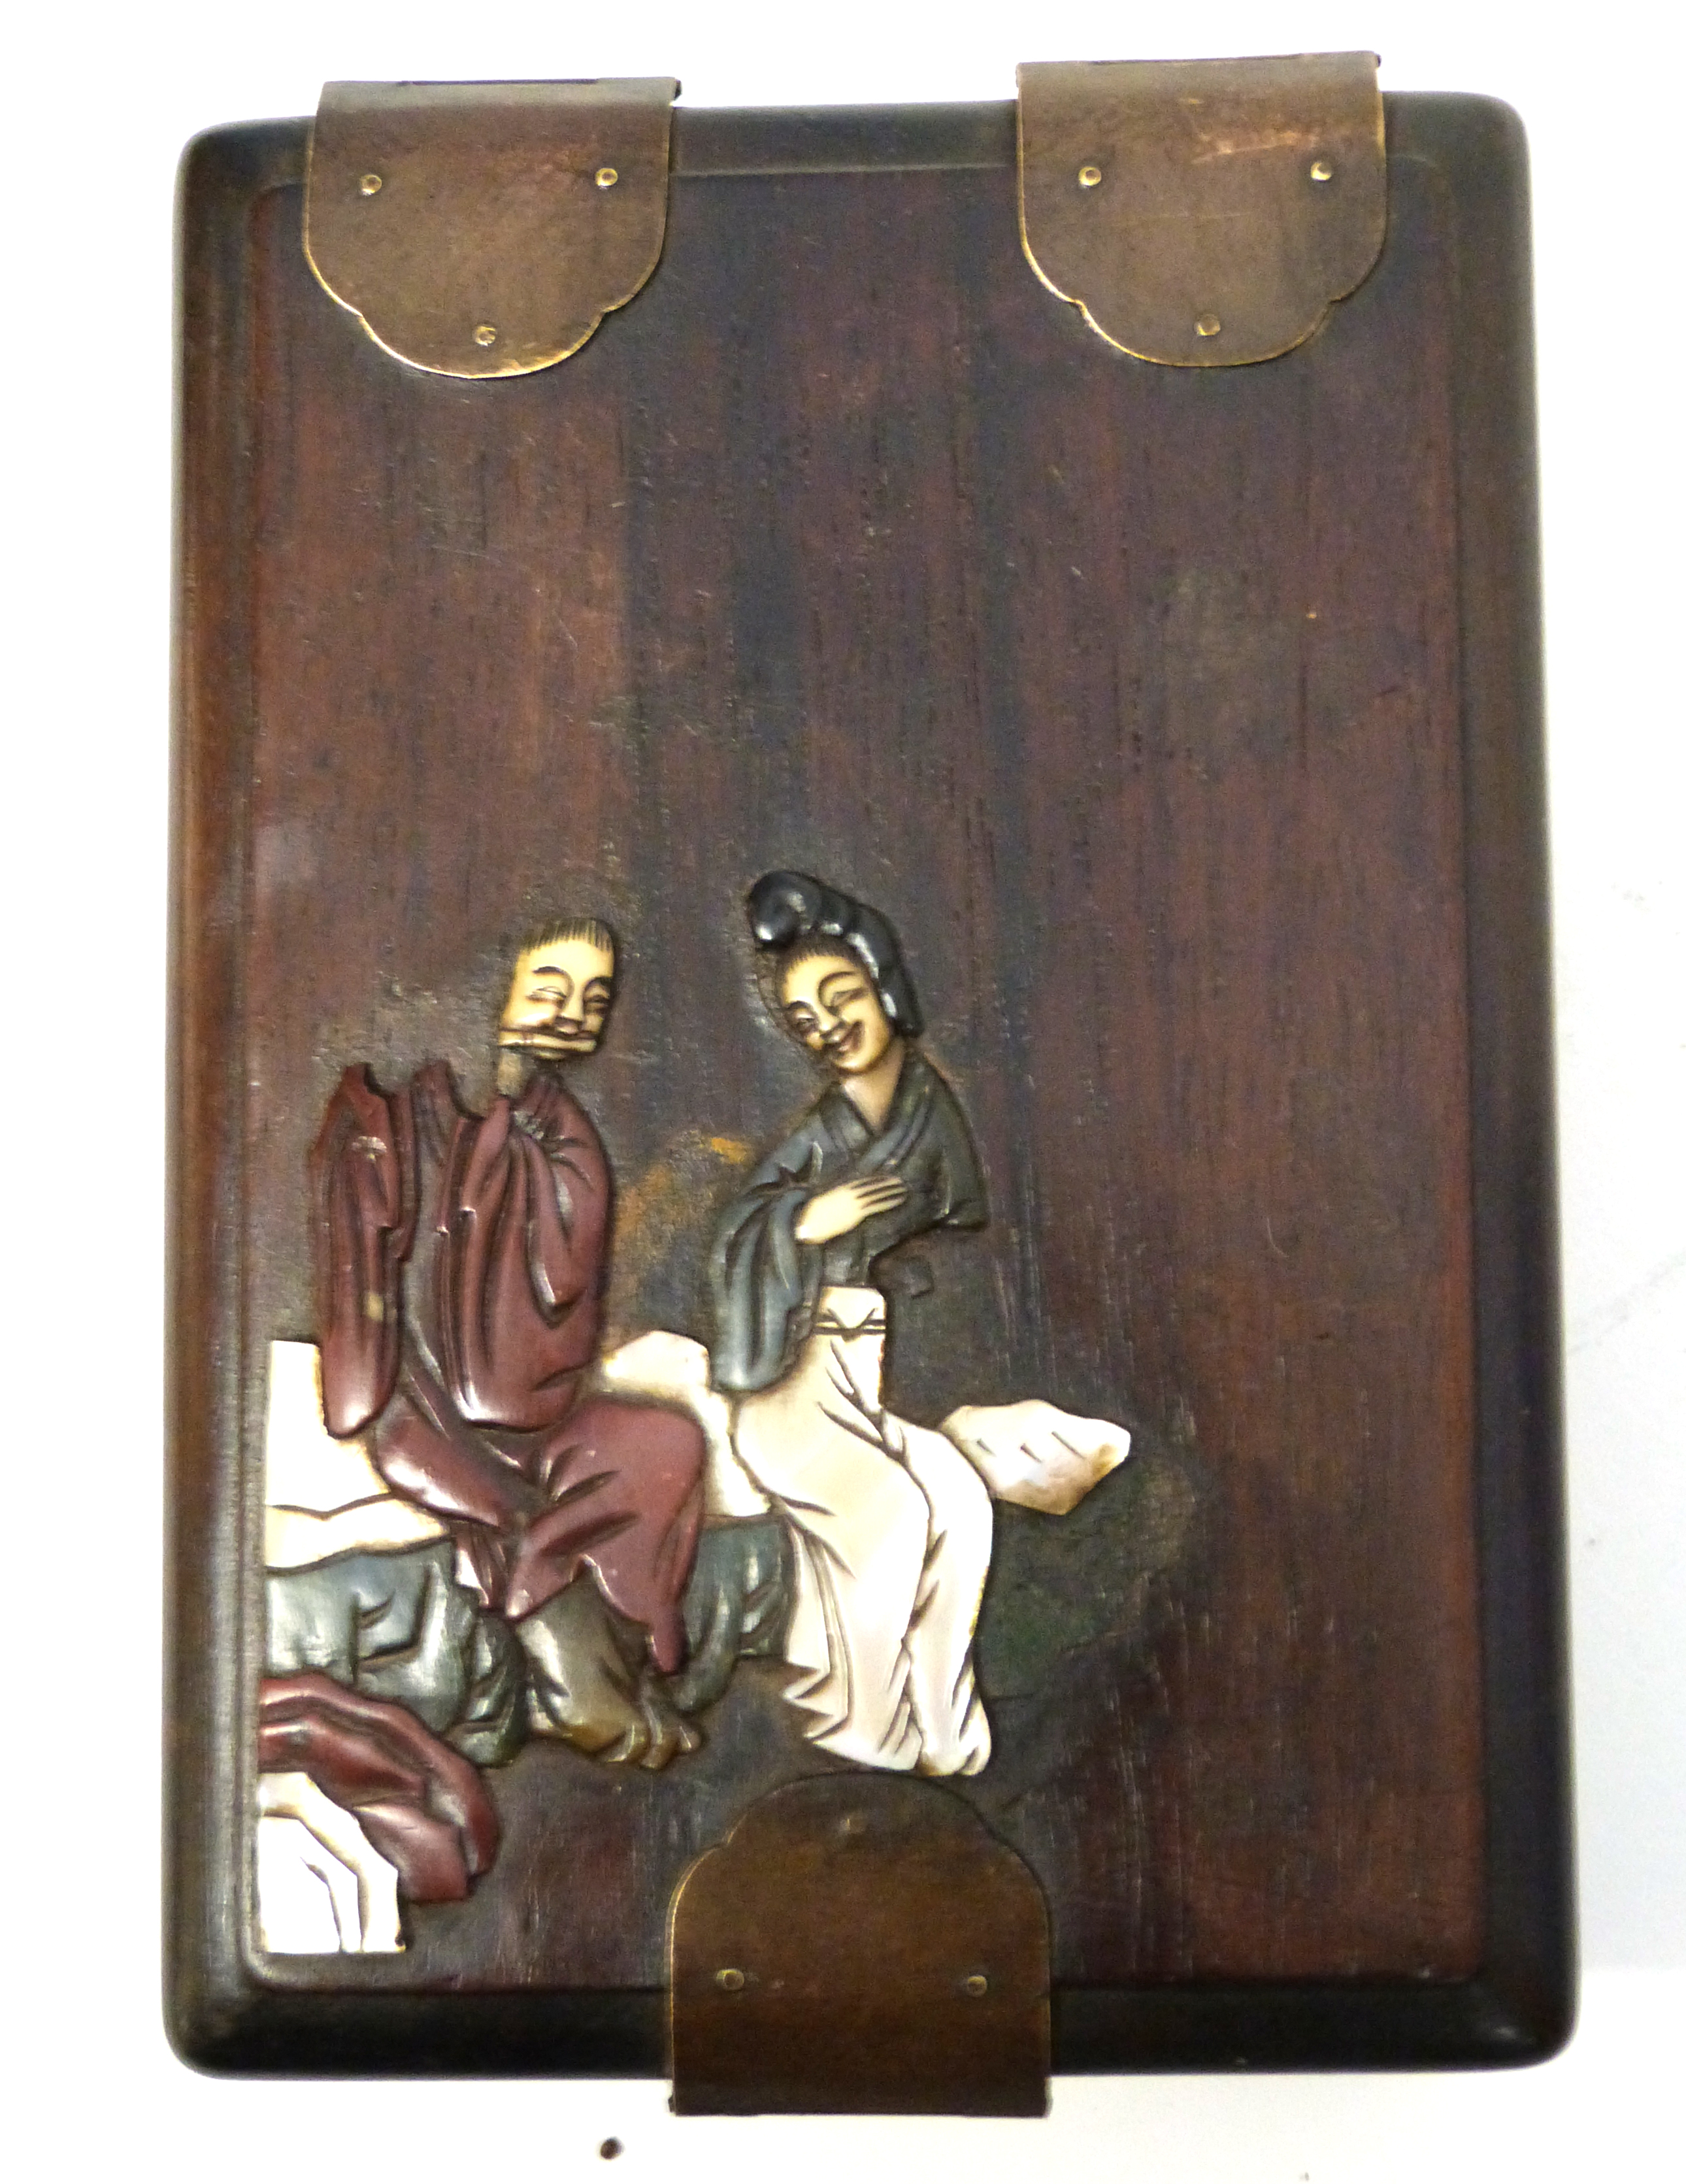 Oriental box with metal strap, the cover modelled in relief with an Oriental couple with metal